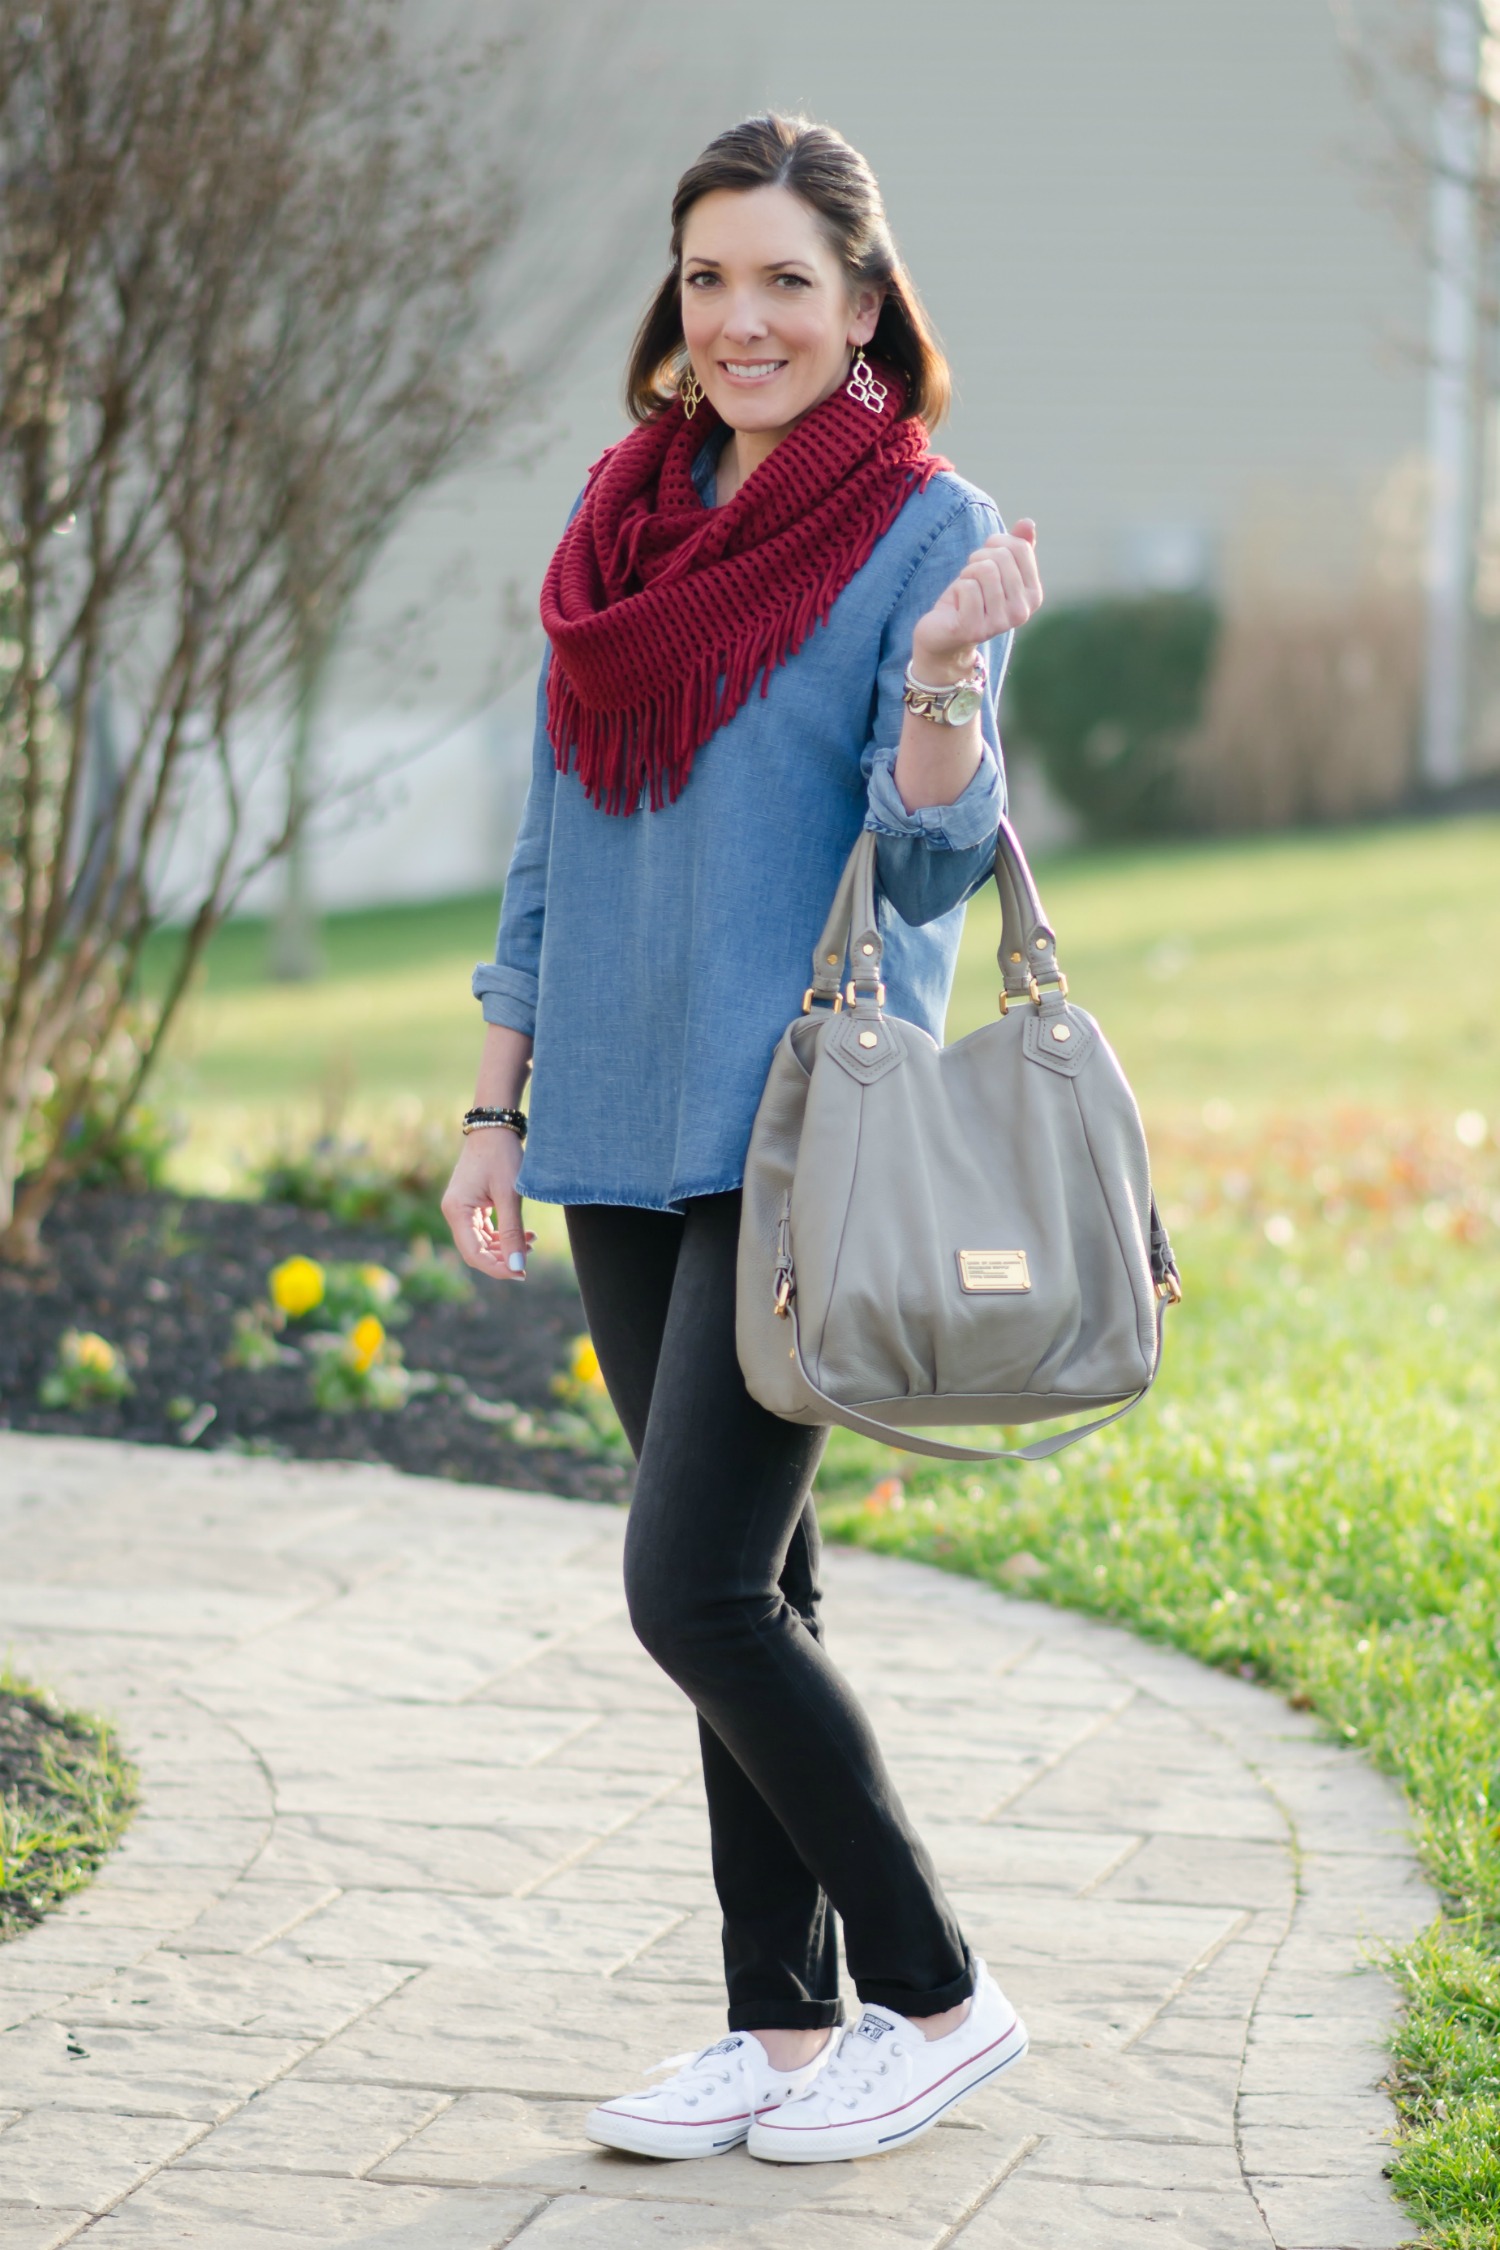 Chambray Tunic with Black Jeans, Red Fringe Scarf, and Converse